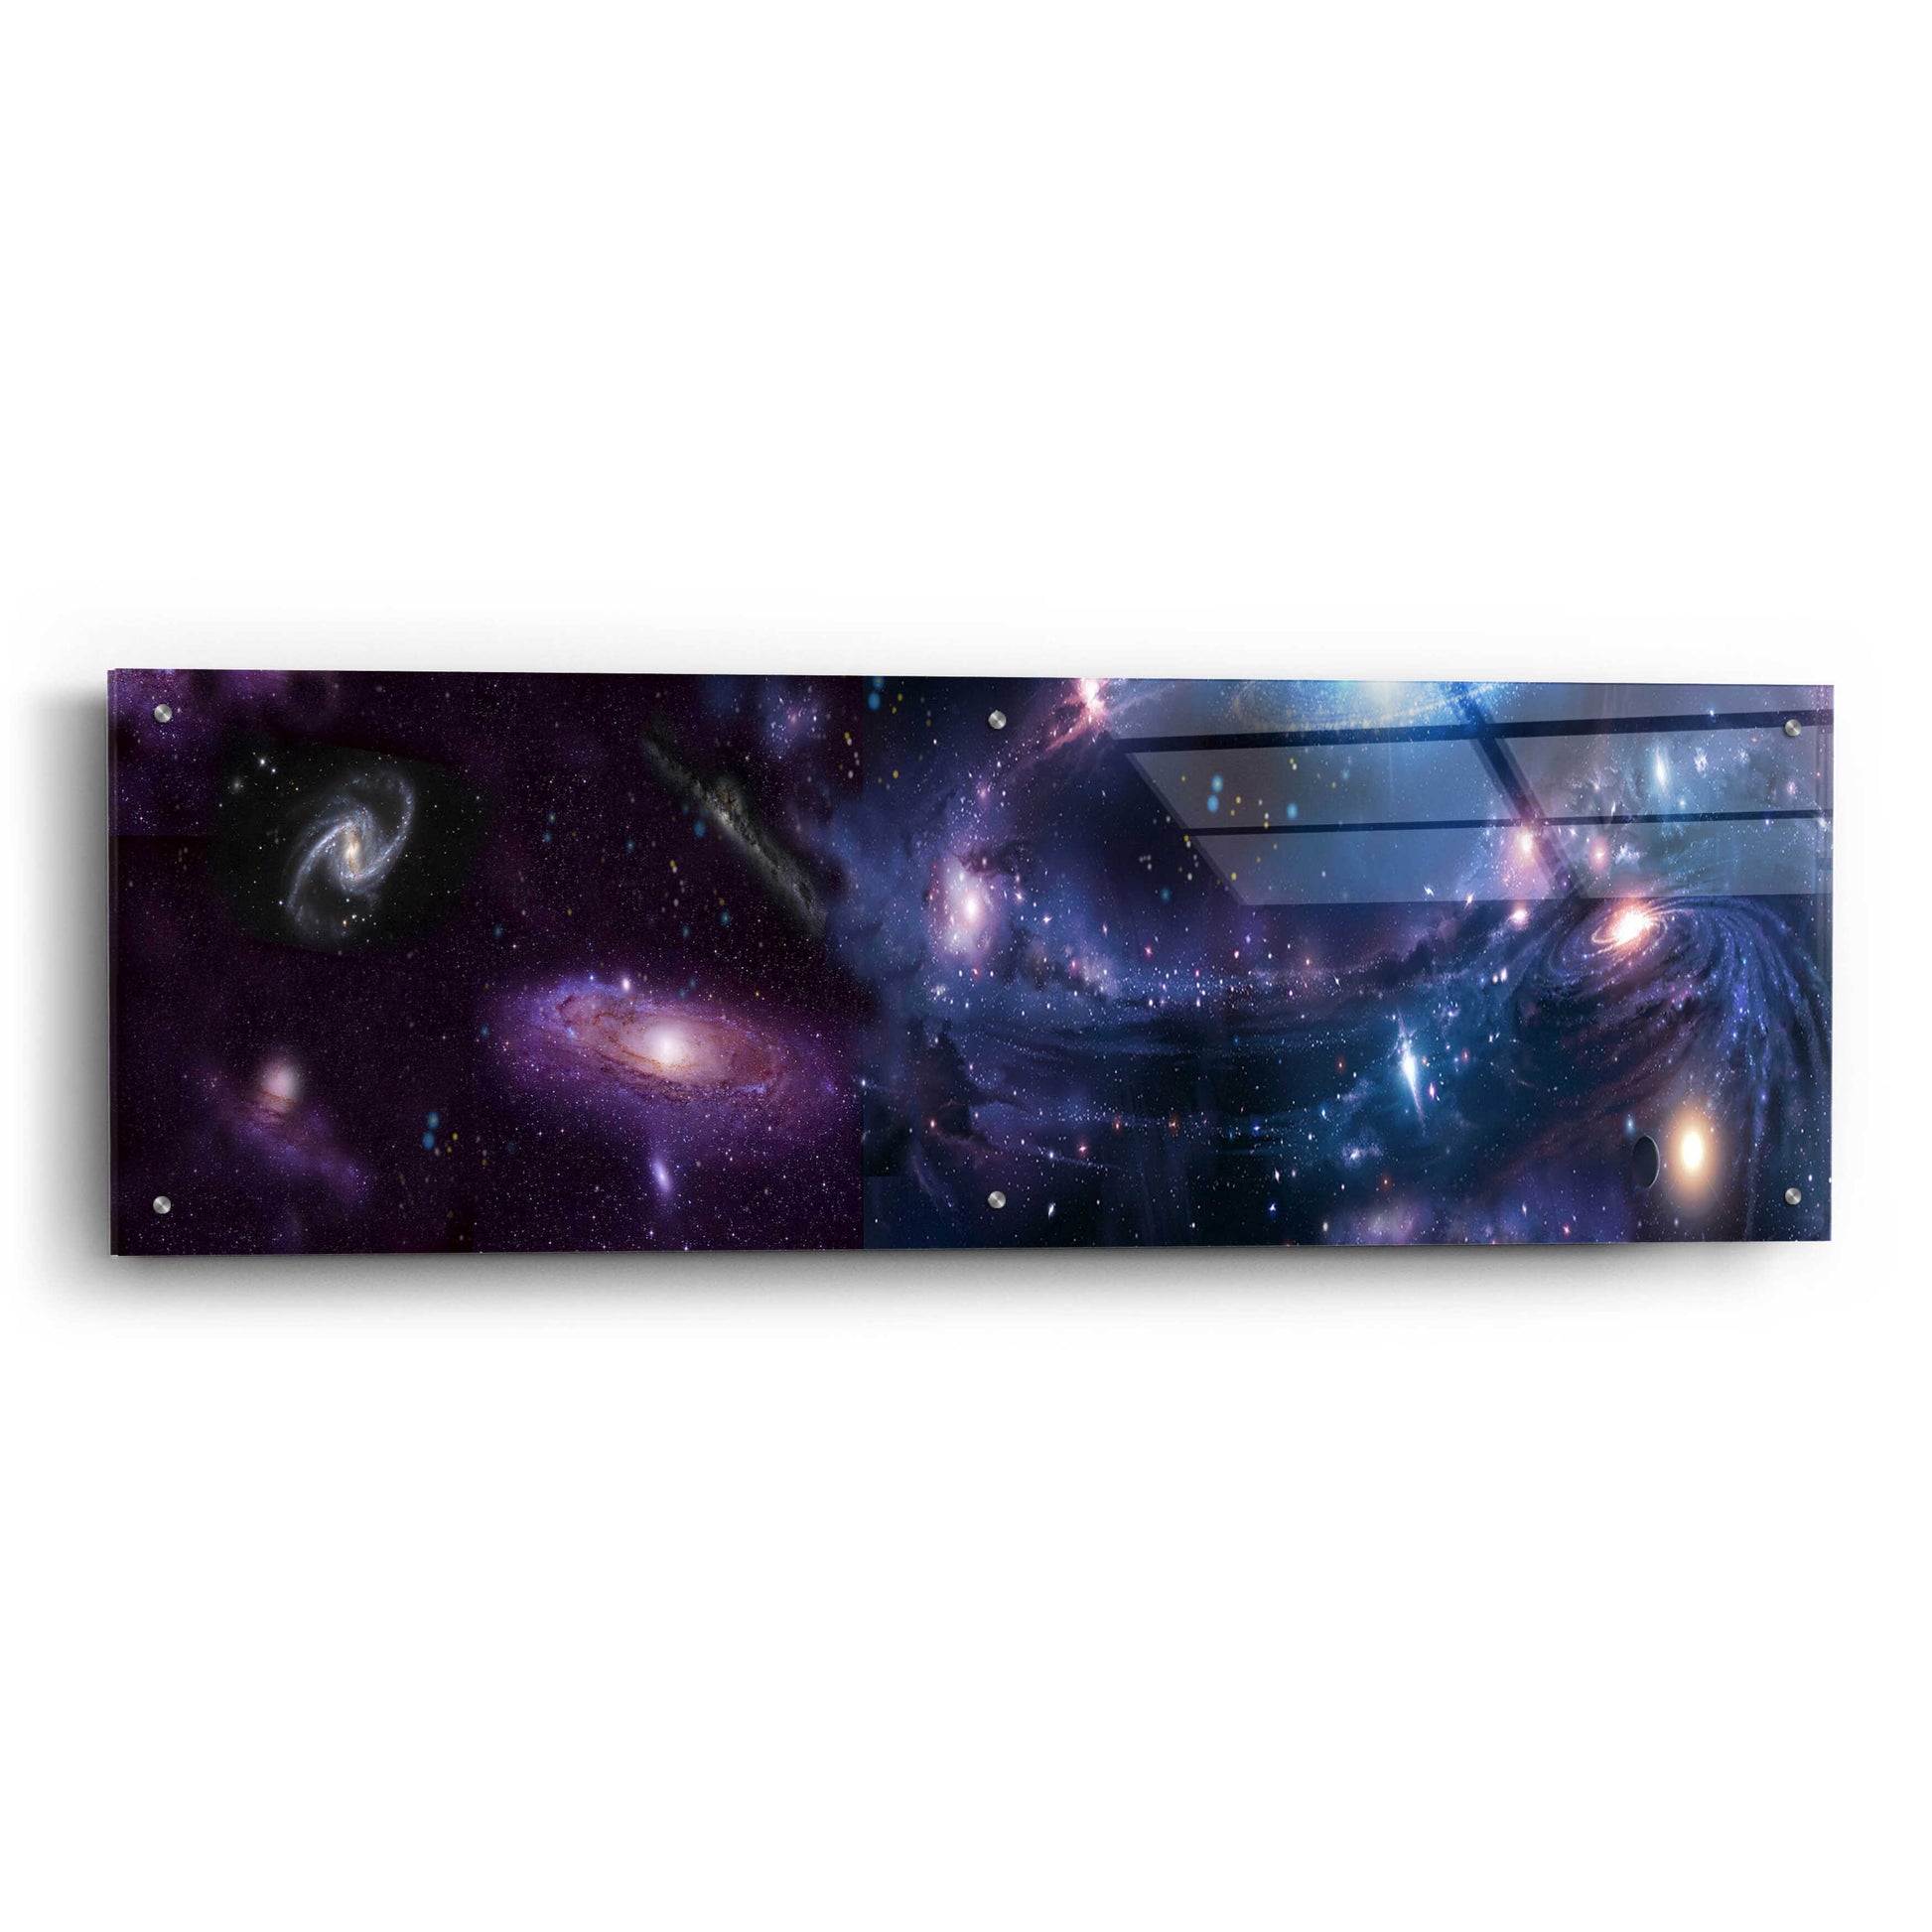 Epic Art 'Galaxies Panoramic' by Enright, Acrylic Glass Wall Art,48x16